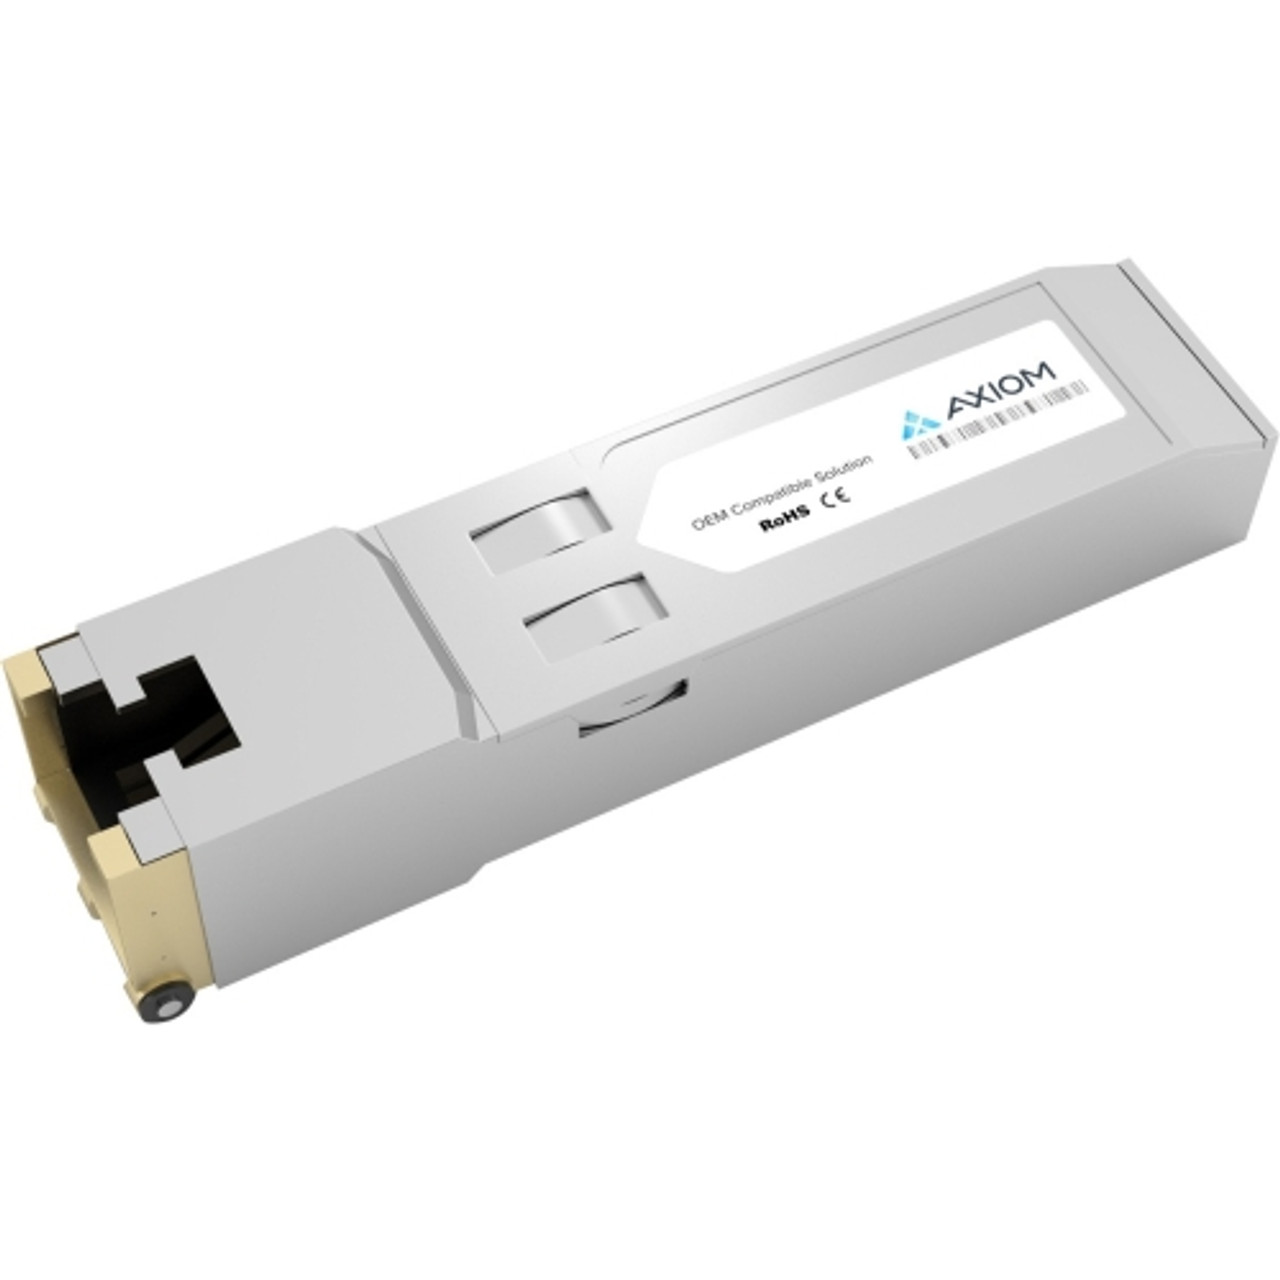 SFP-10GE-T-AX Axiom 10Gbps 10GBase-T Copper 30m RJ-45 Connector SFP+ Transceiver Module for Juniper Compatible